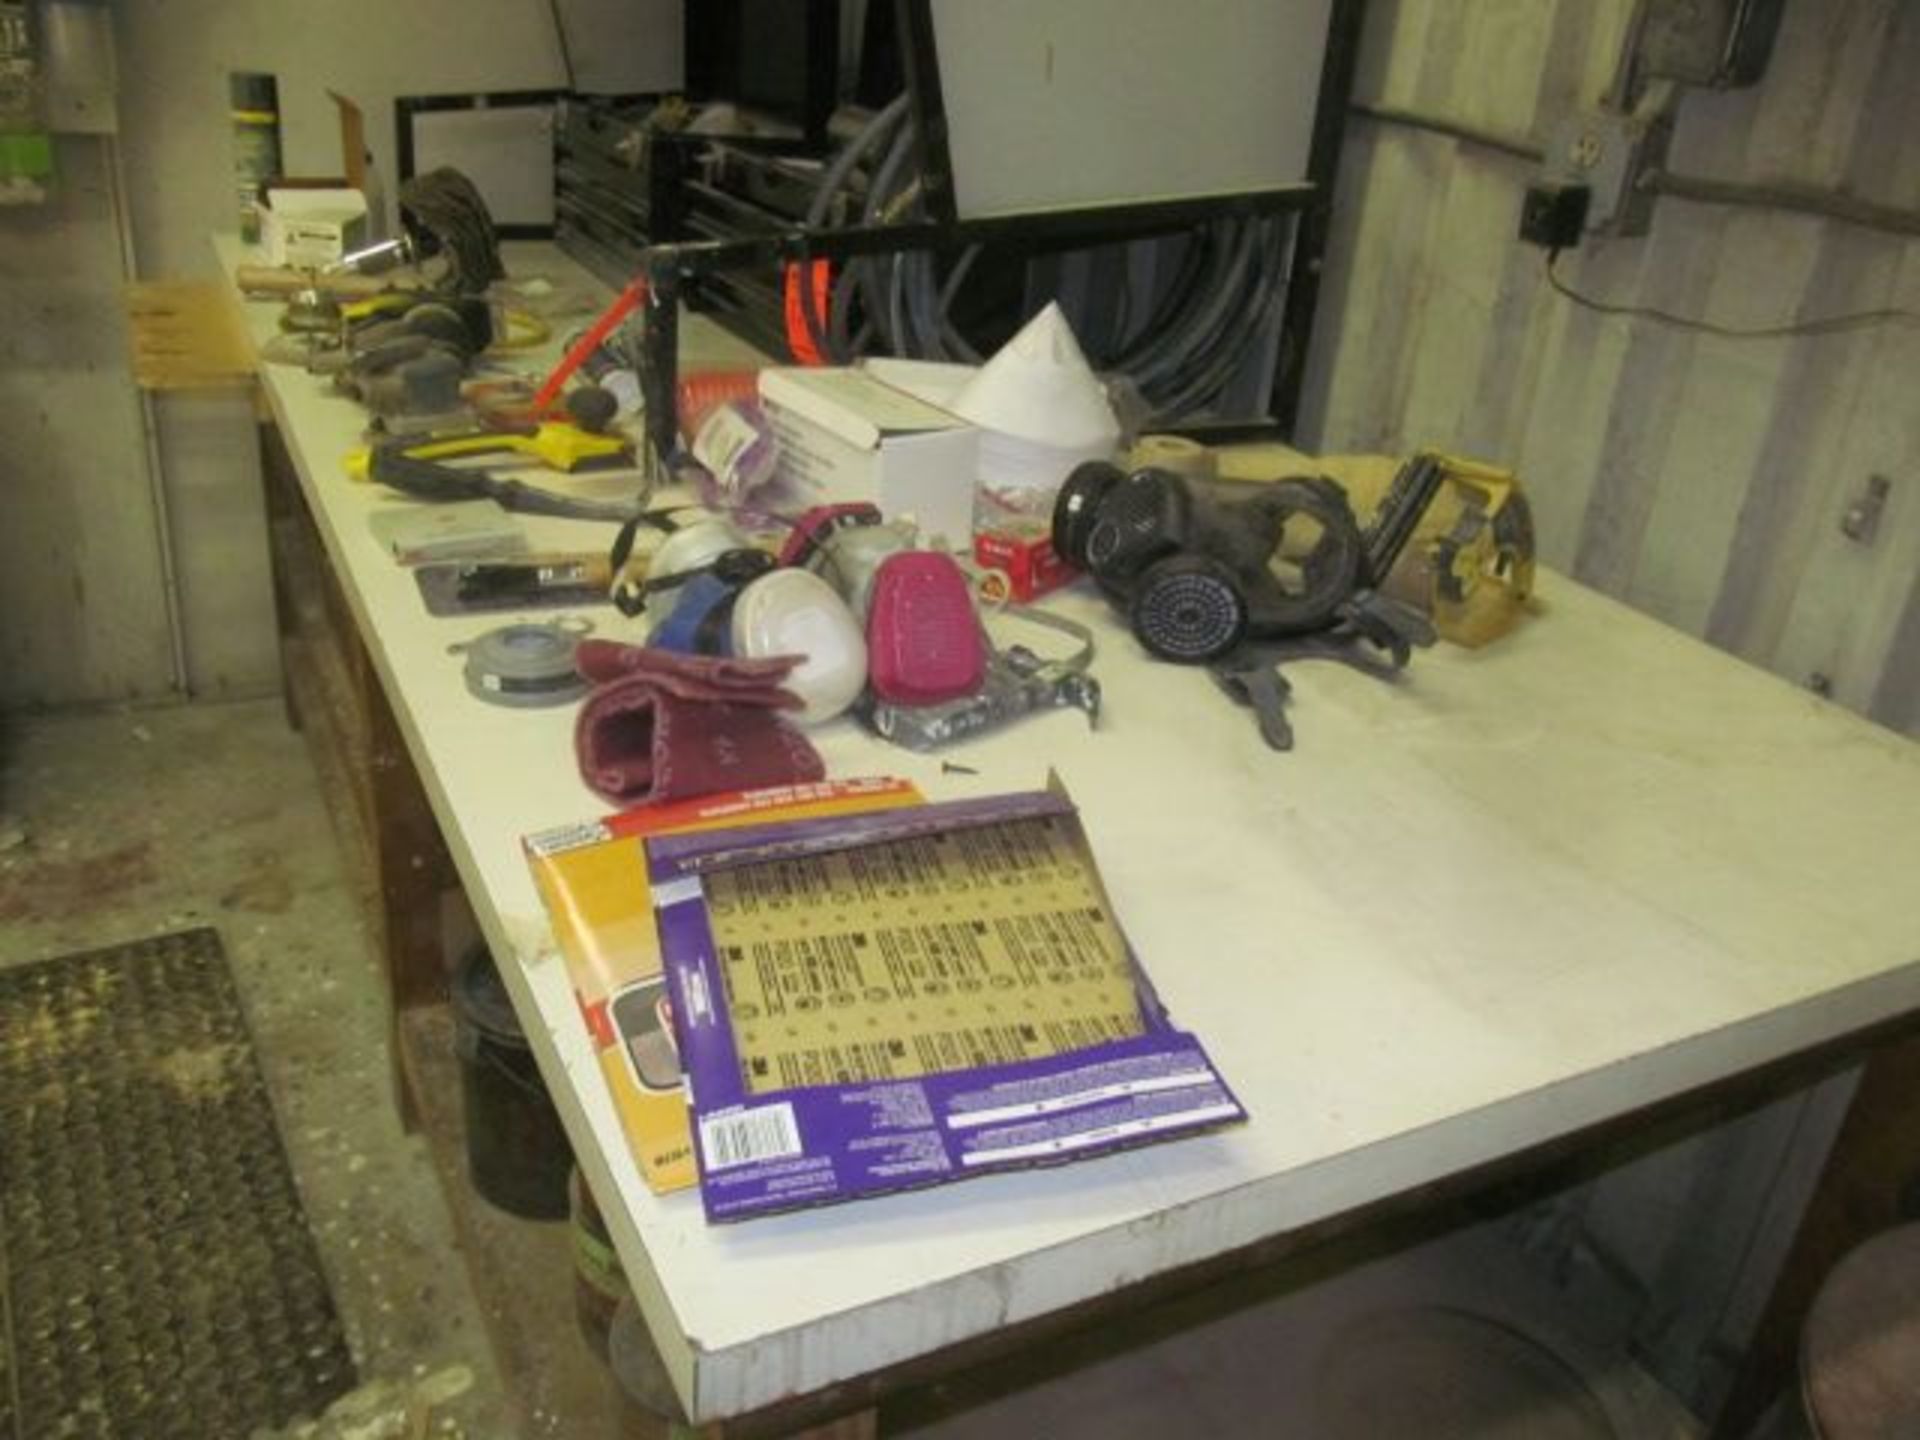 Lot ass't pneumatic tools, (2) tool boxes, respirators, filters, sand paper, 3M dispenser, oil cans, - Image 2 of 3